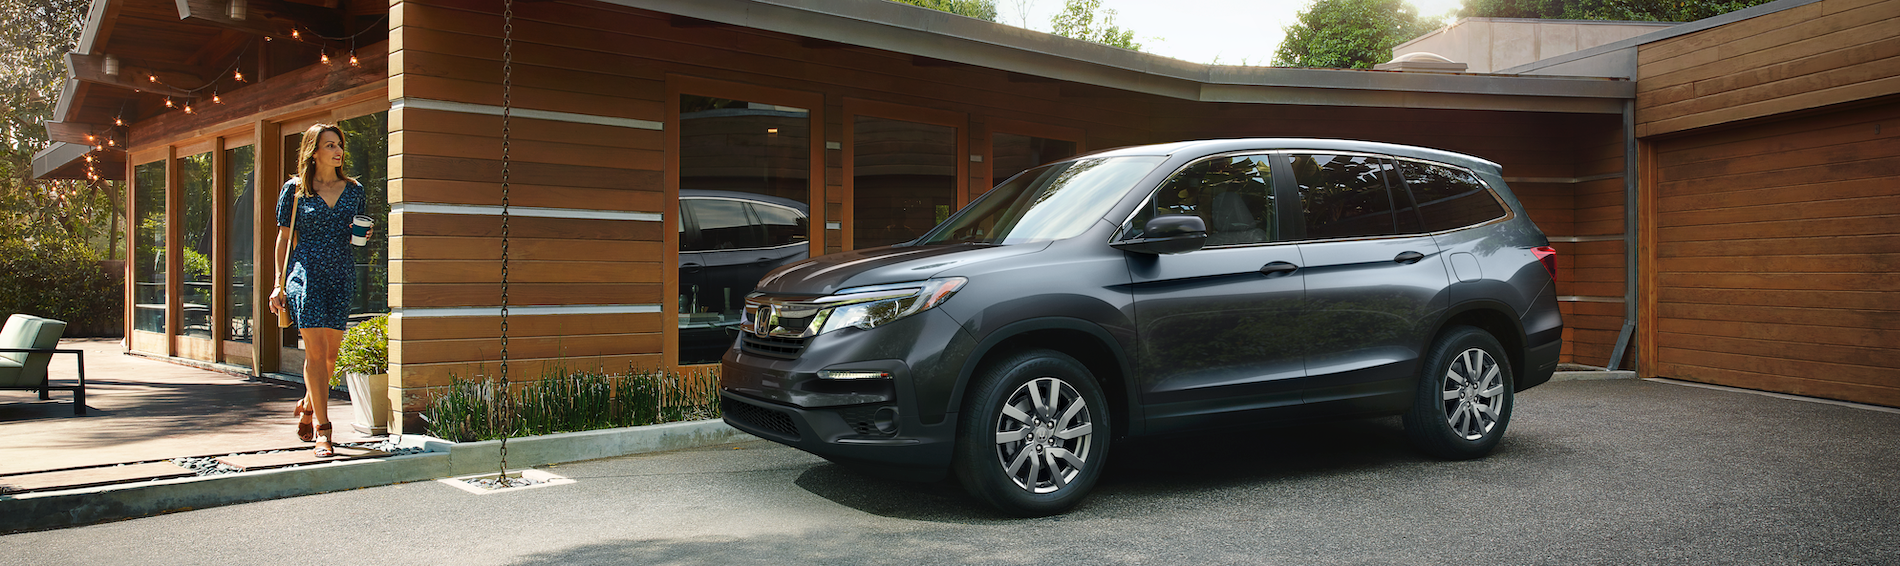 2021 Honda Pilot Parked in the Driveway